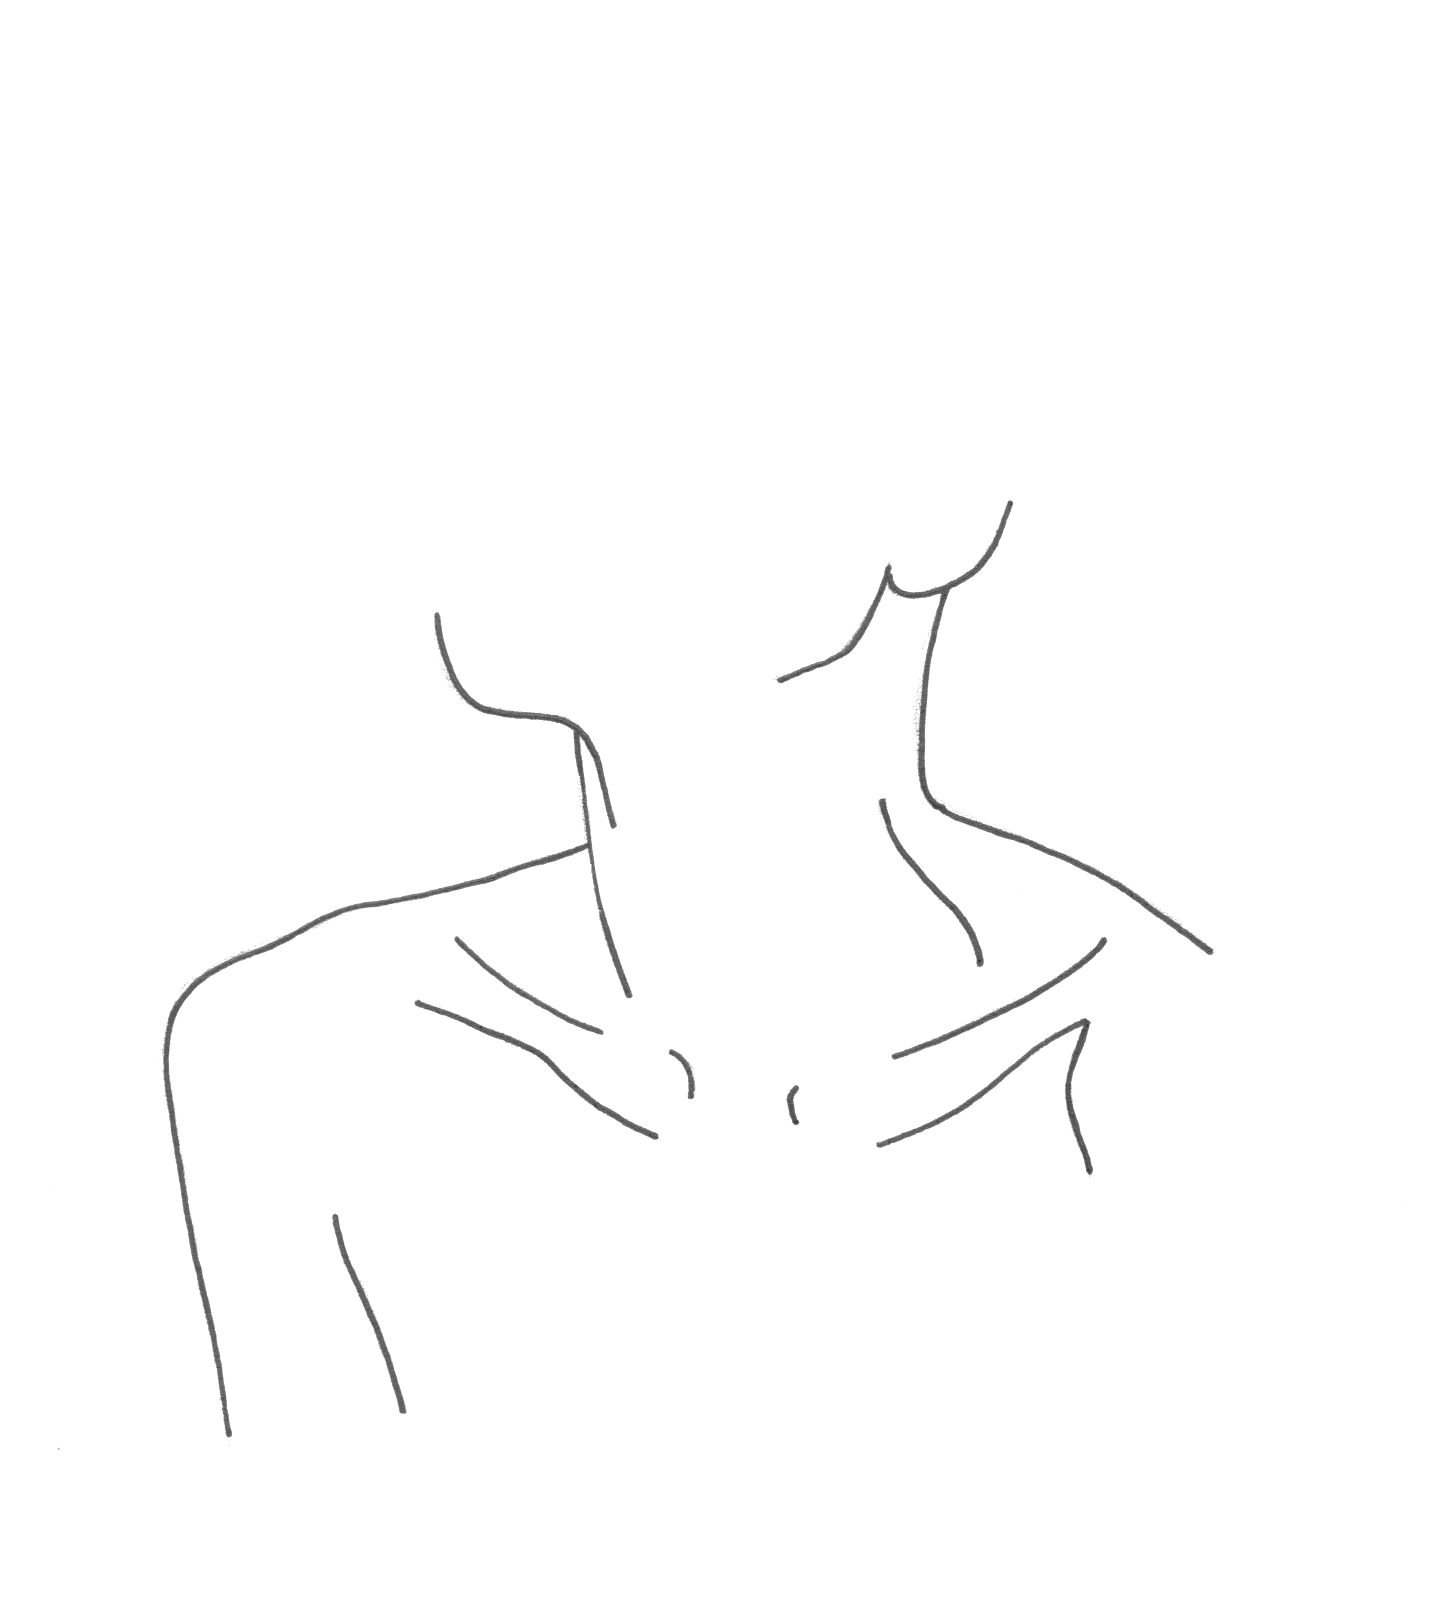 Easy Drawings Aesthetic Minimal Neckline Drawing thecolourstudy by thecolourstudy Draw